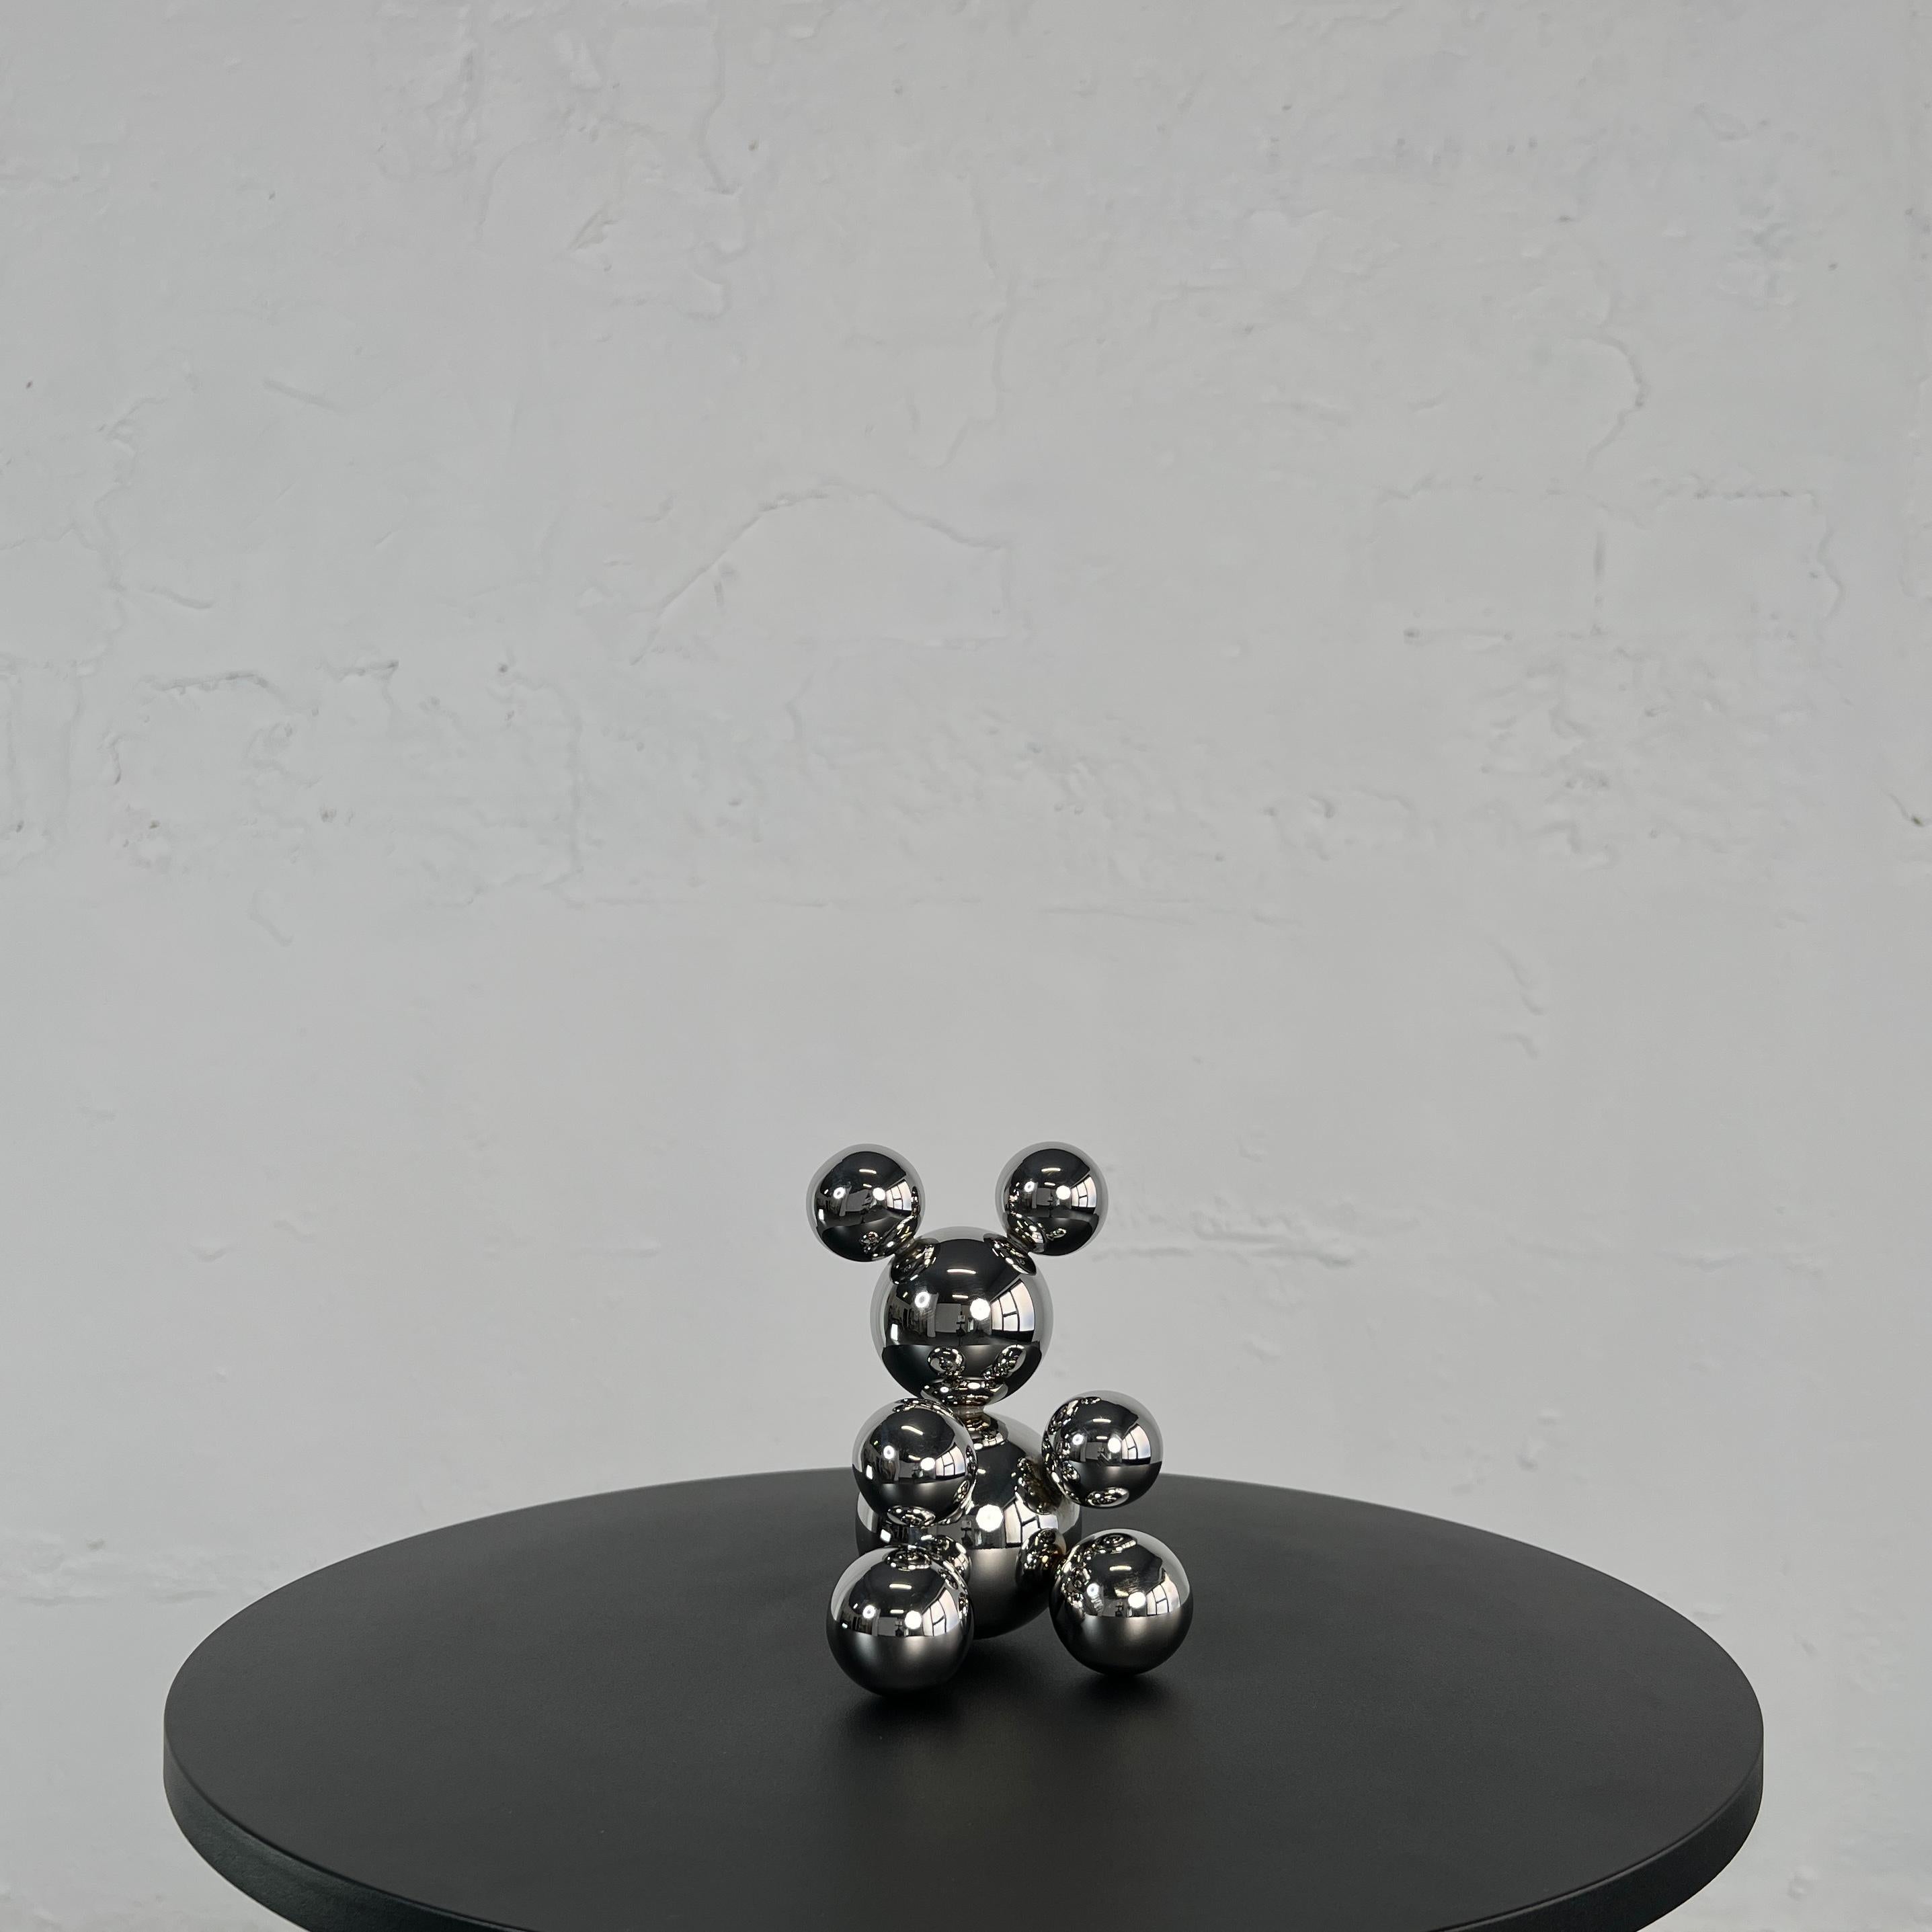 Tiny Stainless Steel Bear 'Ricky' Sculpture Minimalistic Animal For Sale 5